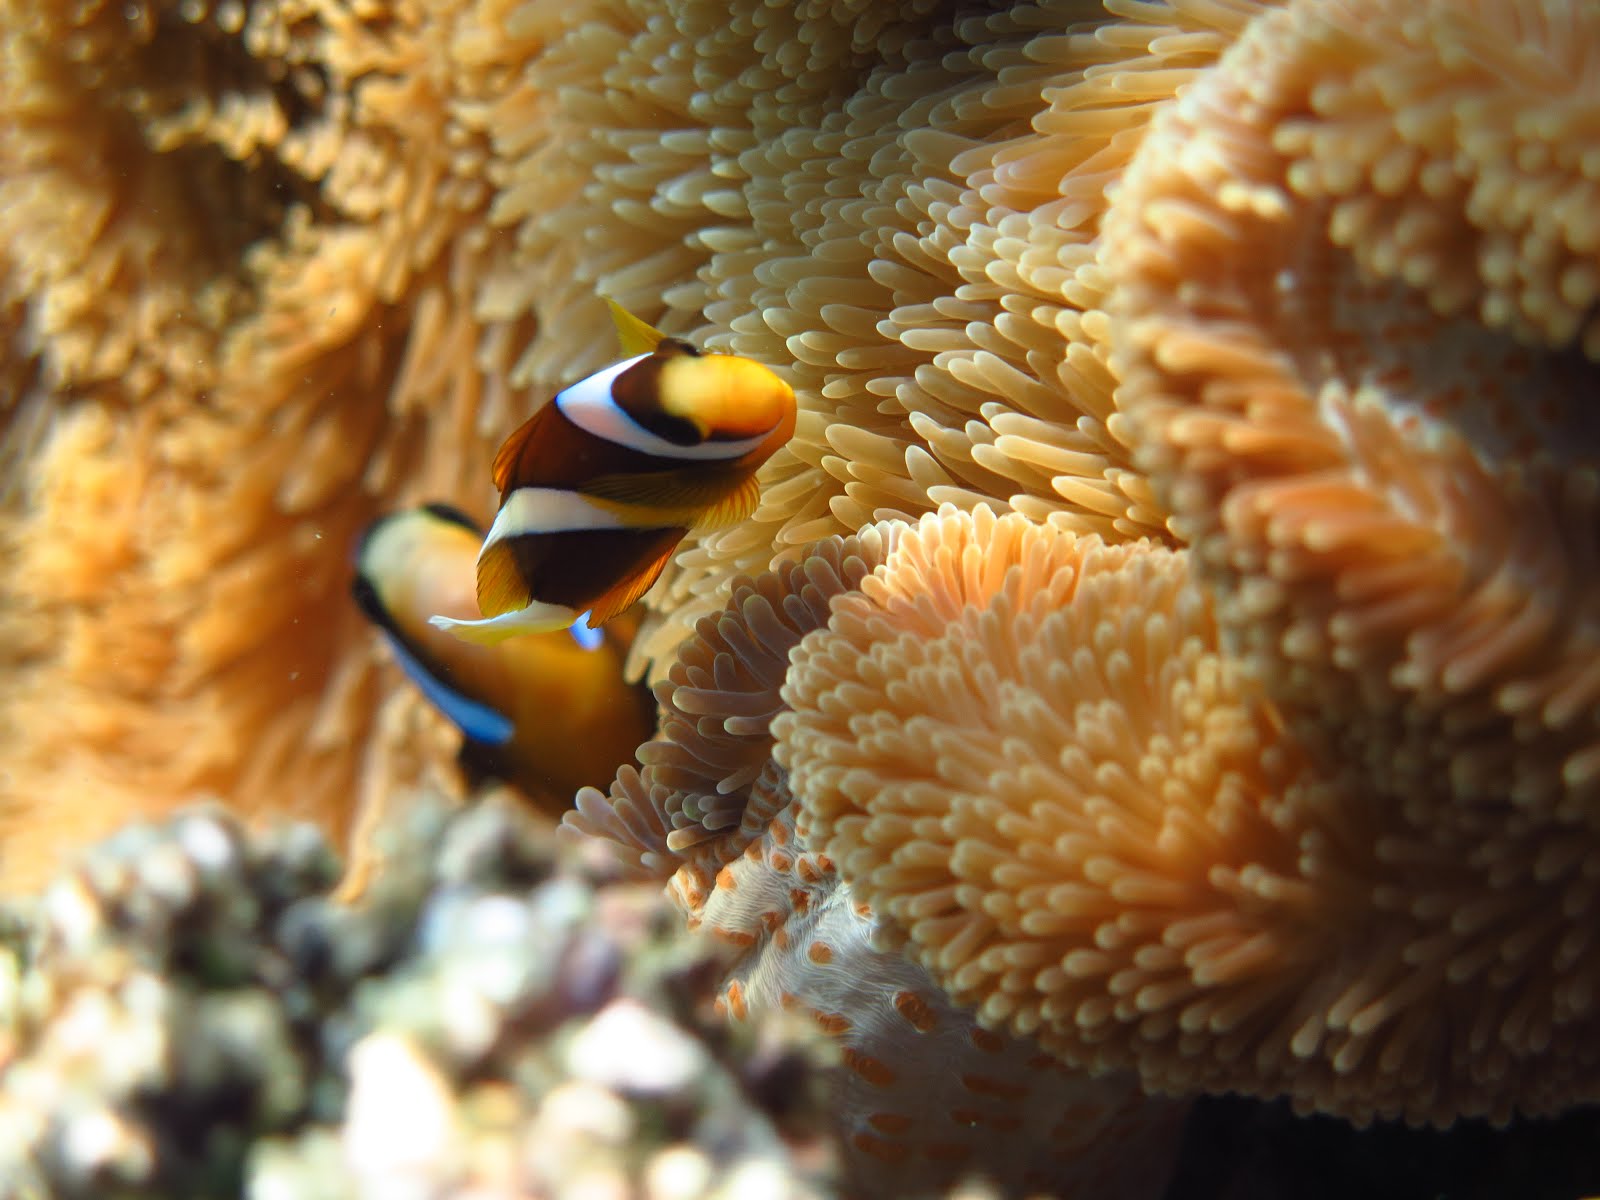 Nemo's cousin - A Great Barrier Reef Anemone Fish